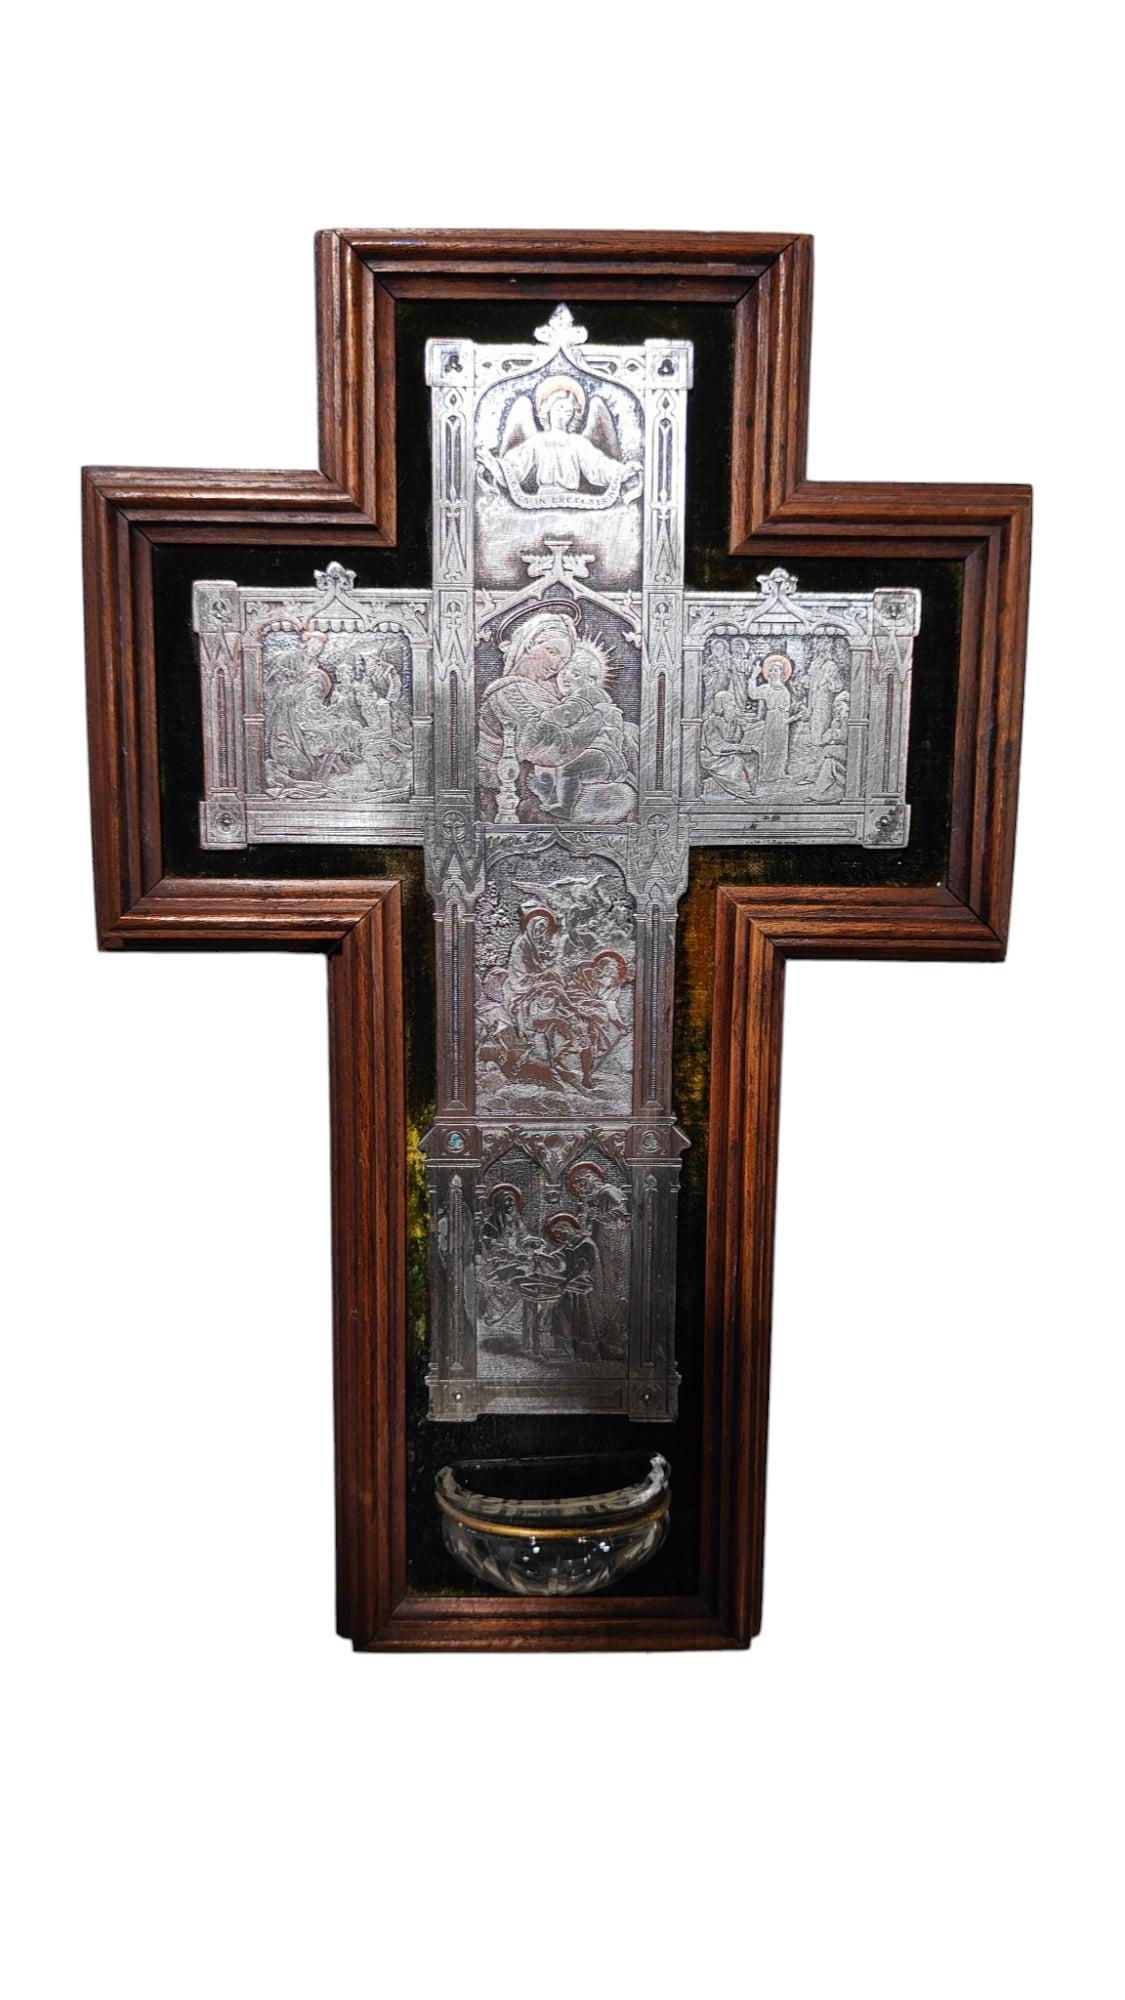 Italian Cross With Blessing Pot From The 19th Century
Beautiful 19th century Italian cross with a carved glass blessing jar. The cross has a wooden structure and the body is made of engraved and silvered copper. Dimensions: 26x17x4 cm